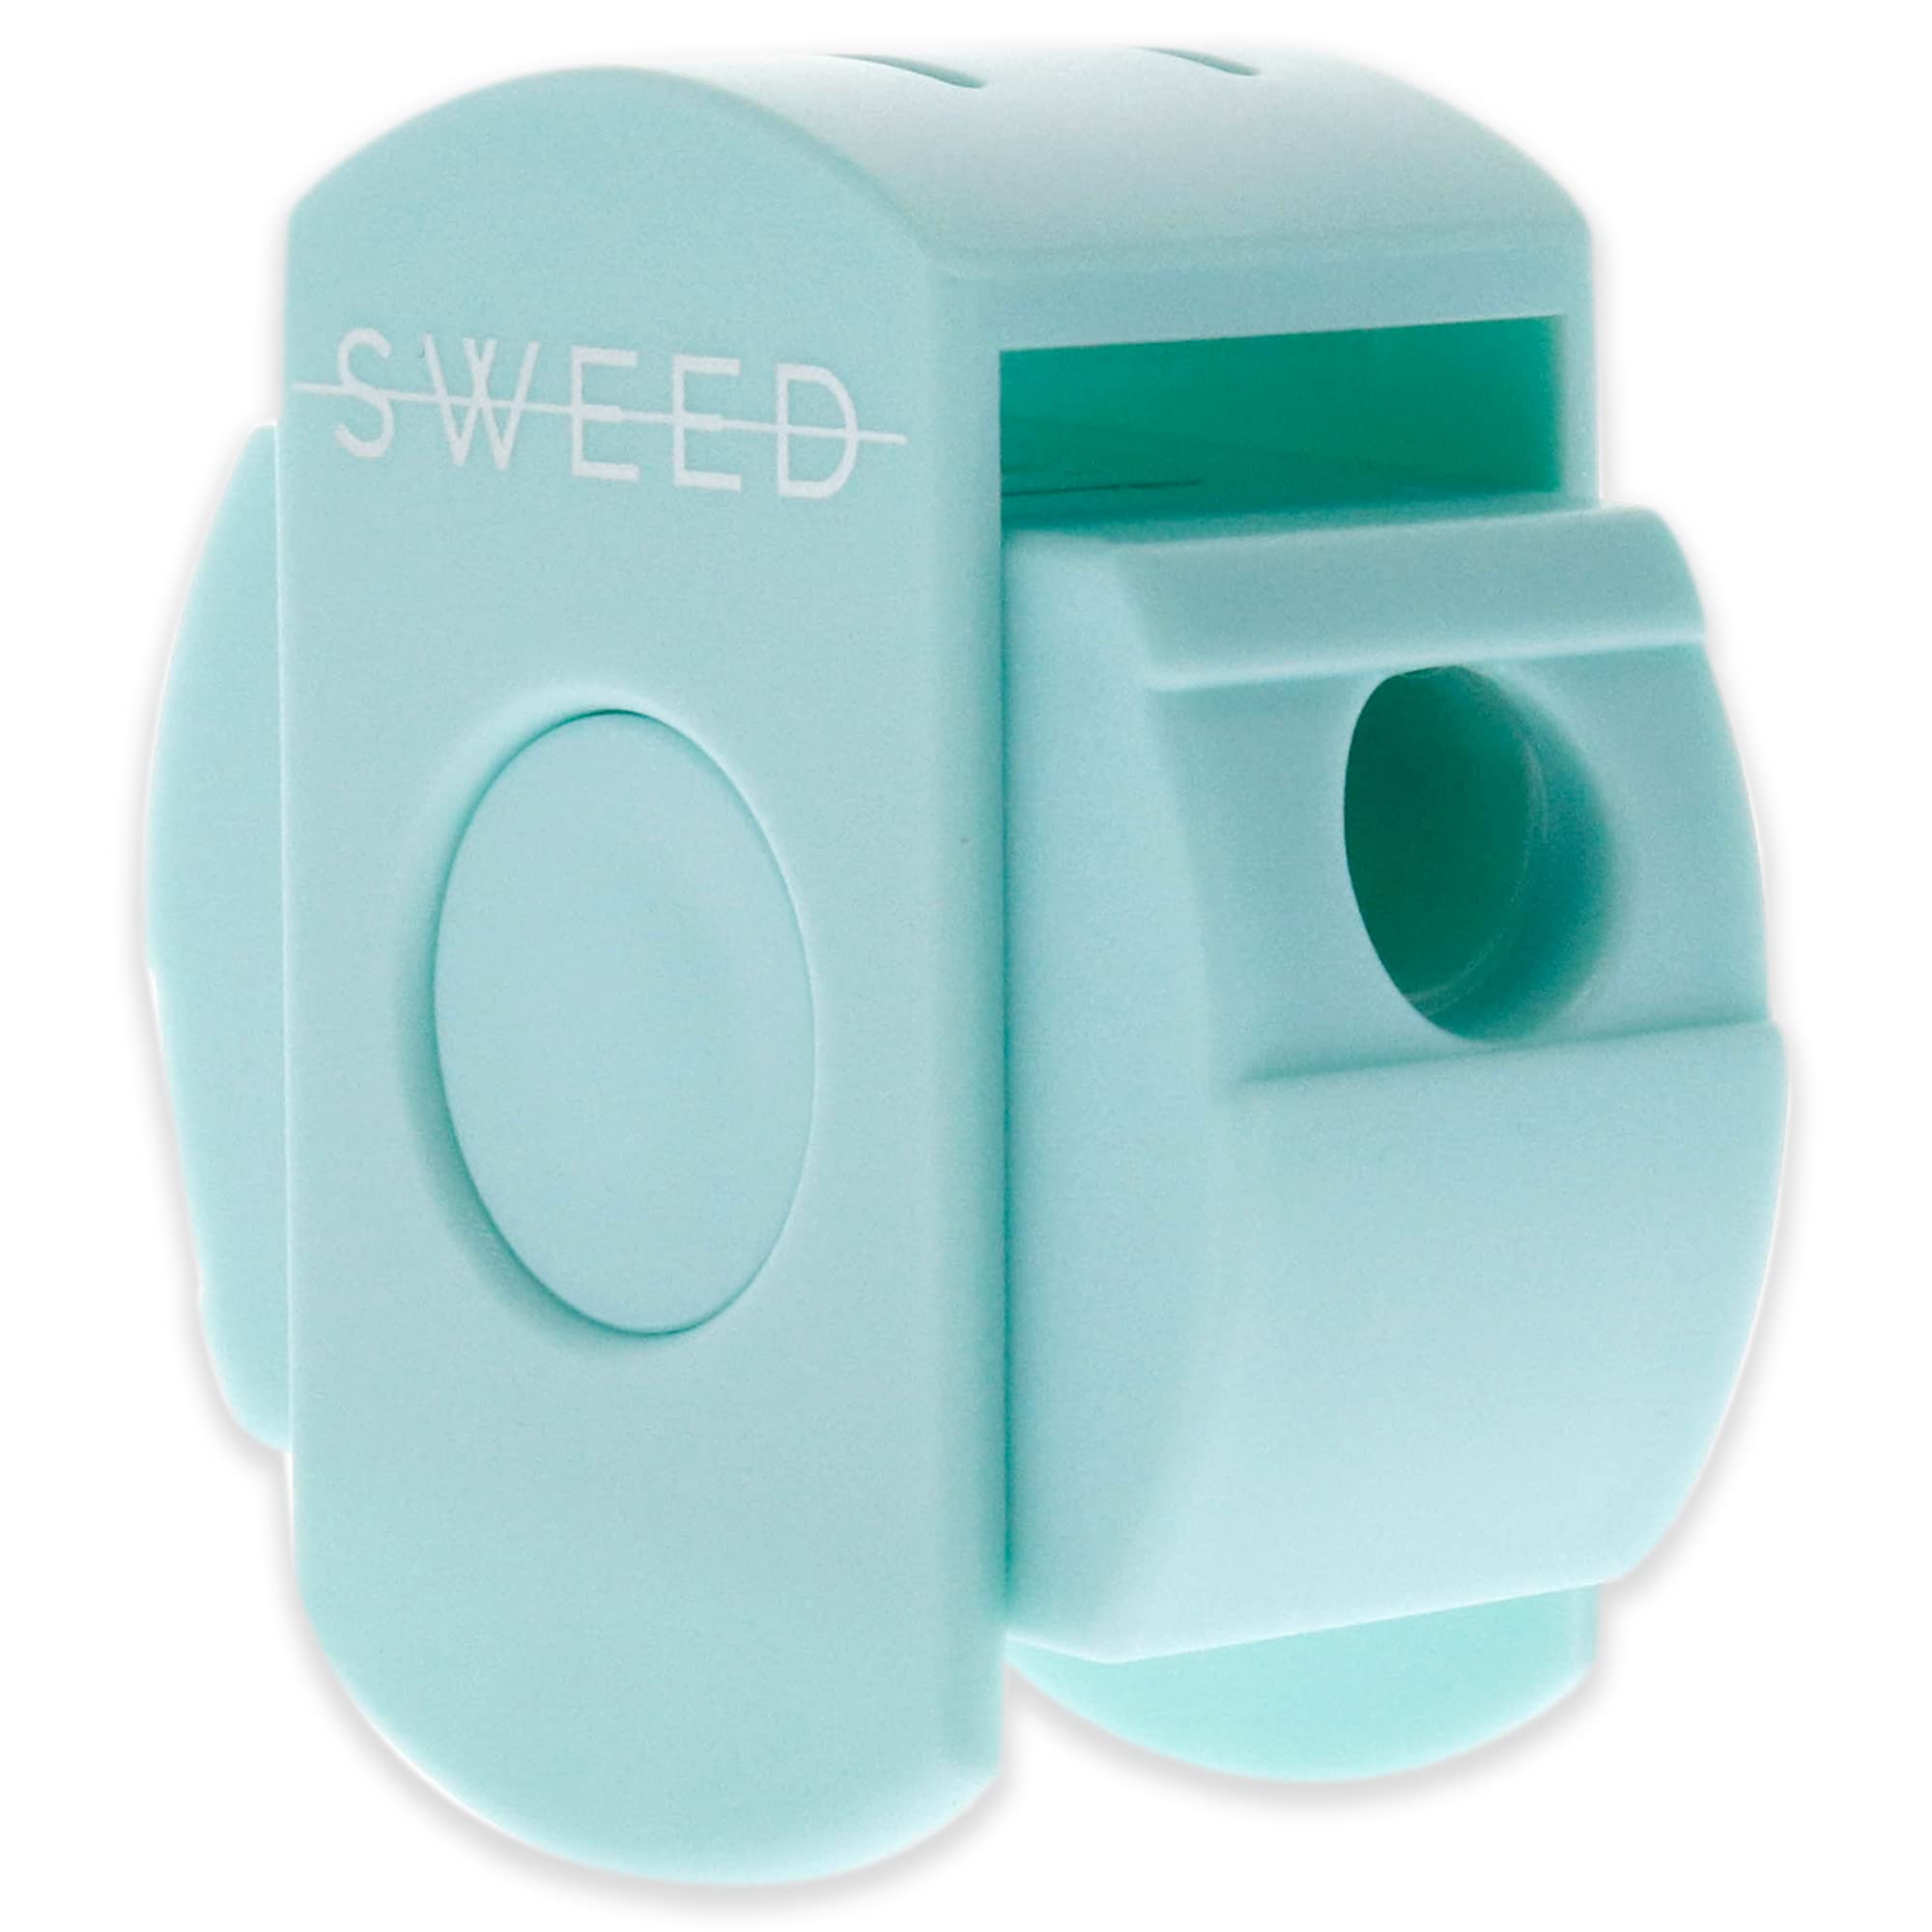 Sweed Pen Sharpener - Travel Friendly Tool with Professional and Mess Free Holder - Stainless Steel & Rust Proof Blades